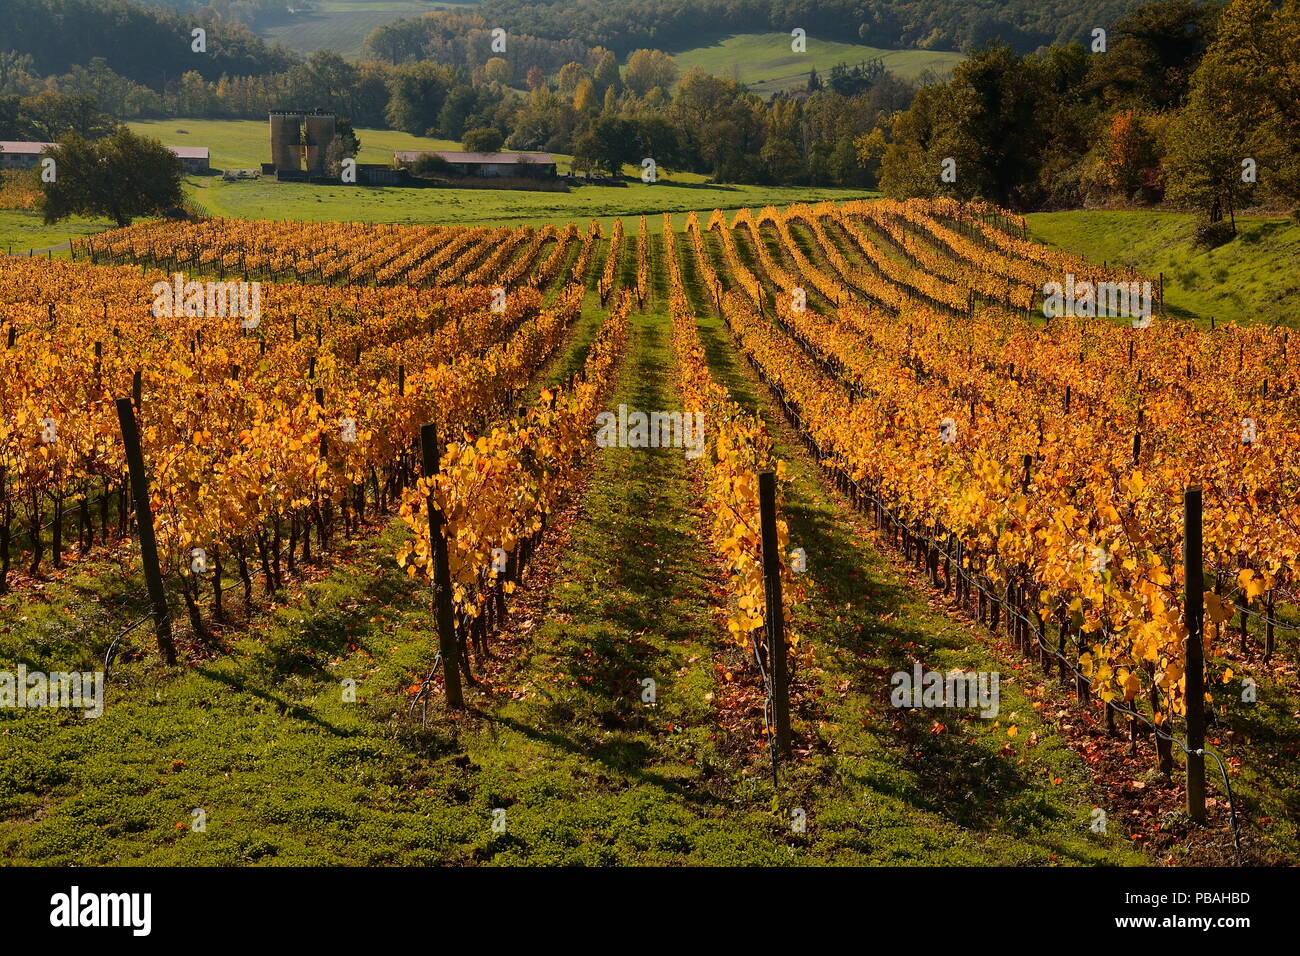 THE VINEYARD IN AUTUMN-THE MAGIC COLORS OF AUTUMN Stock Photo